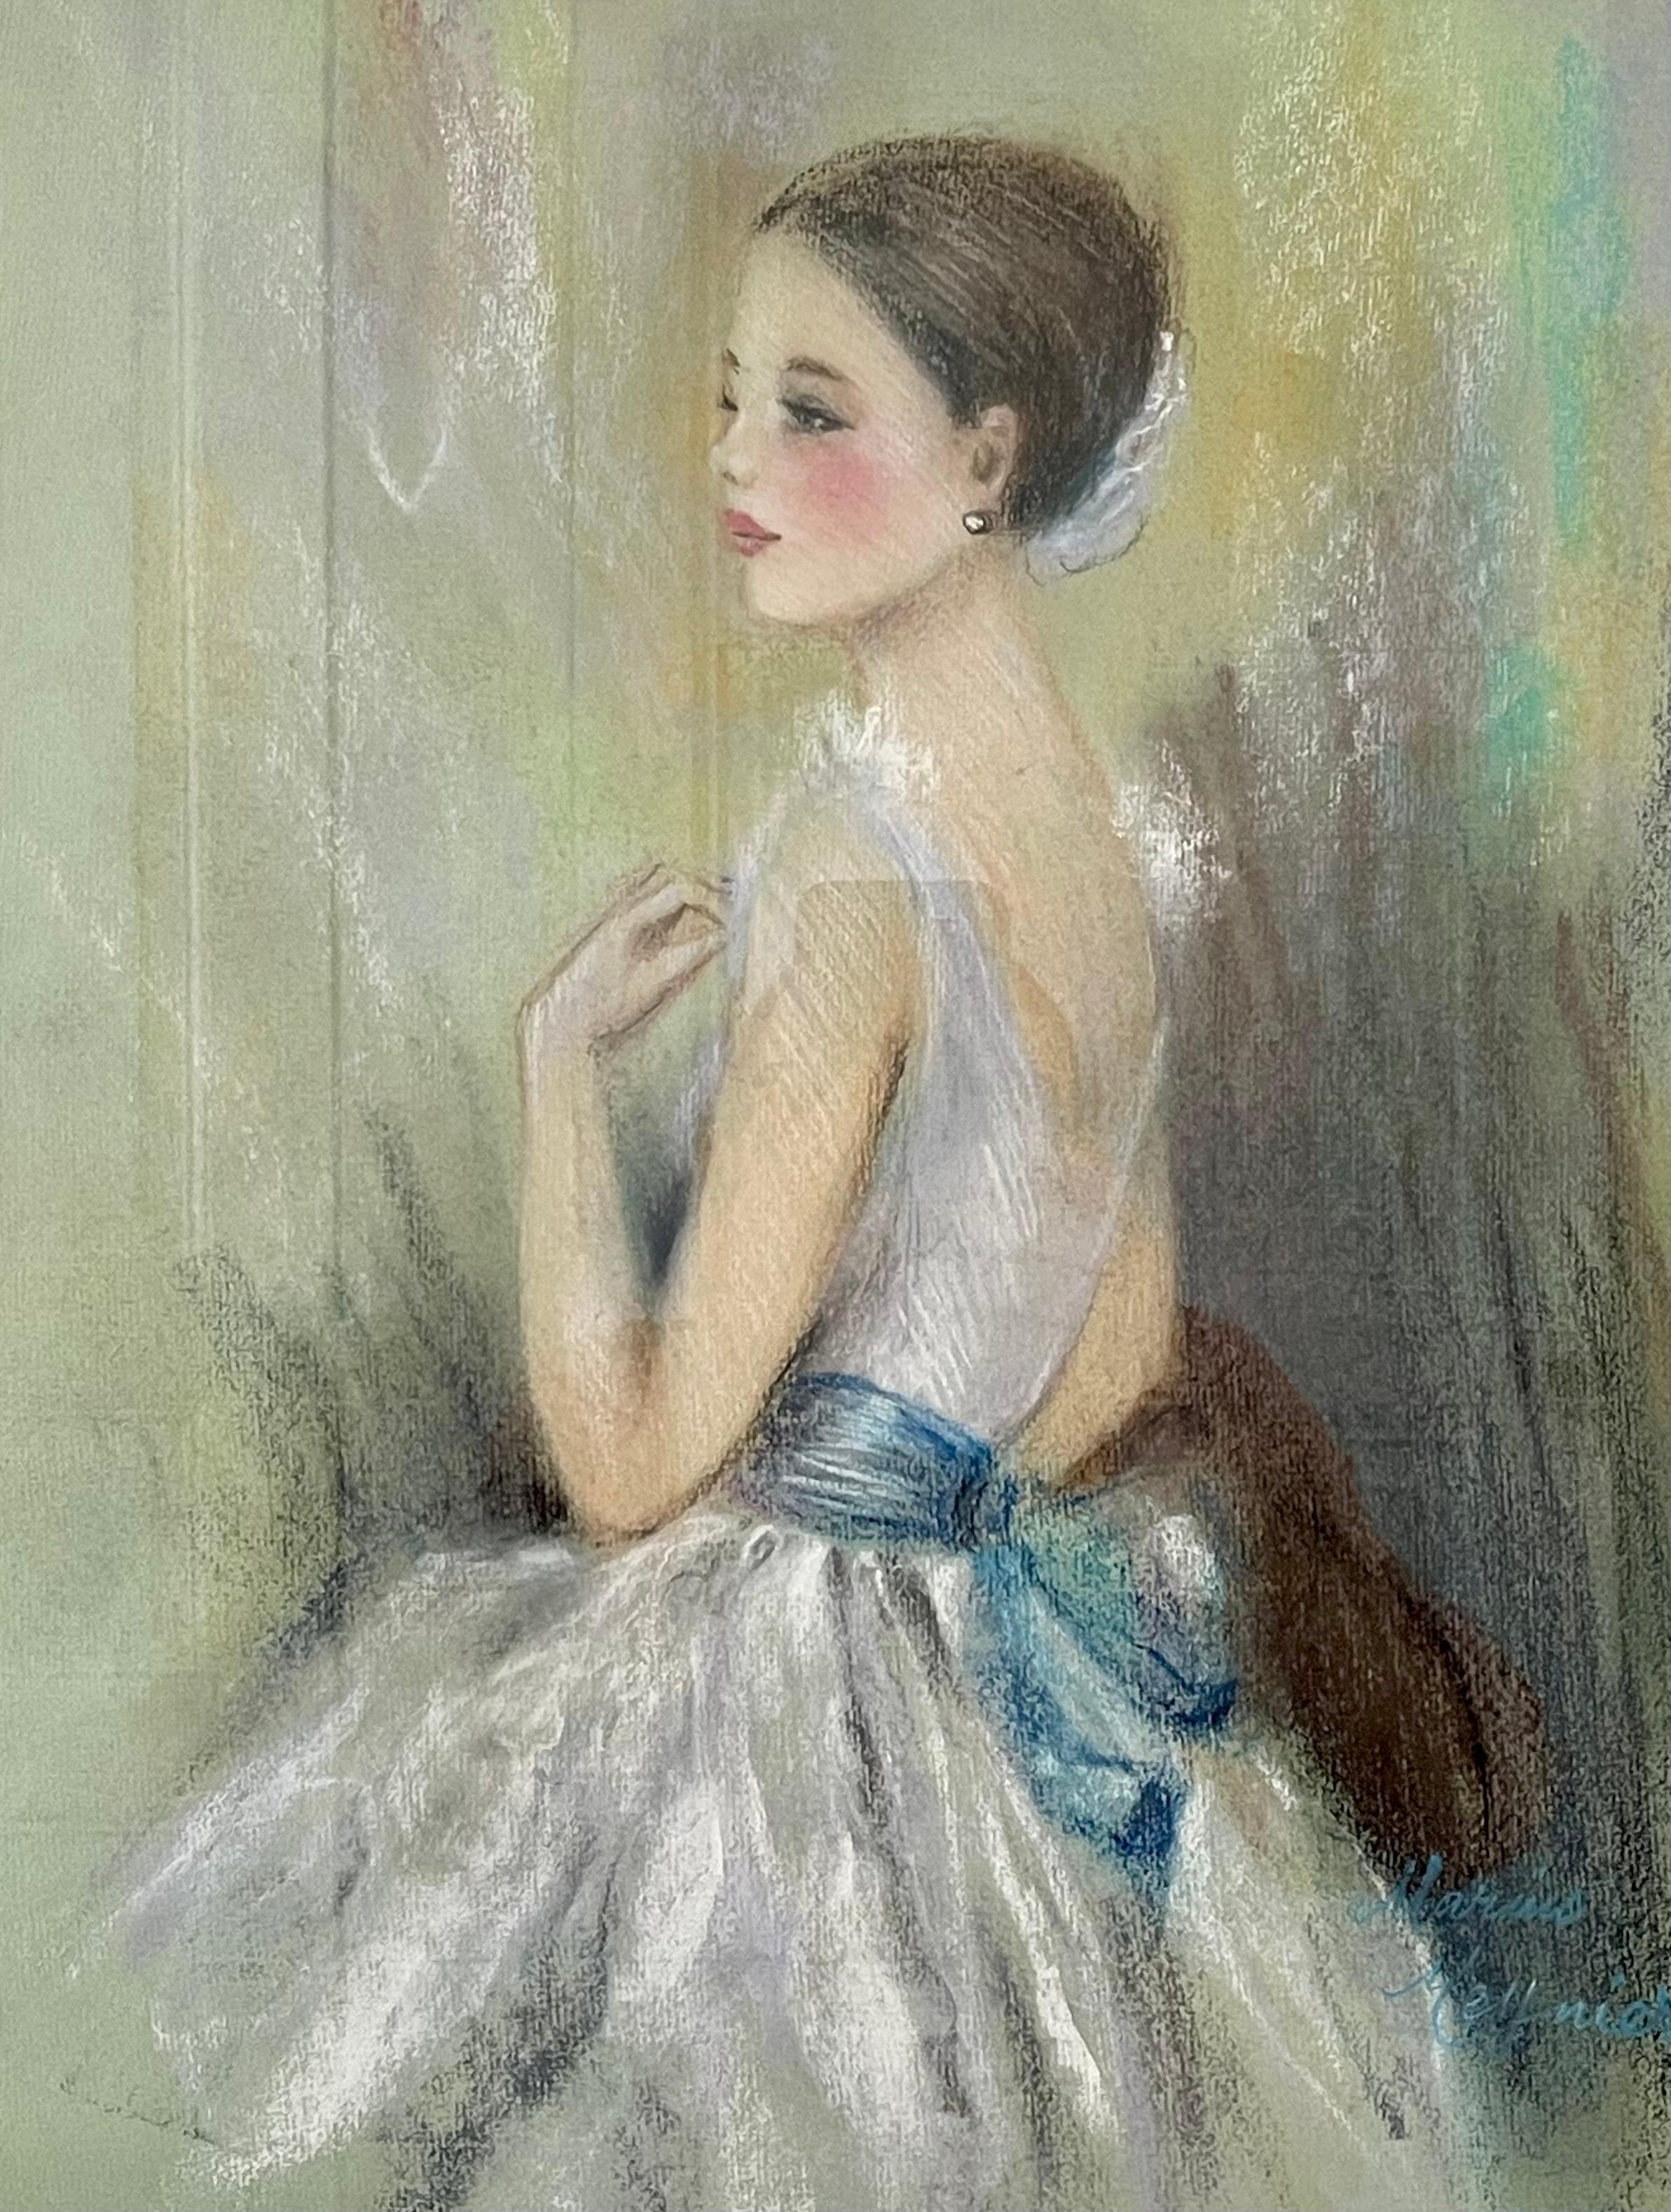 This beautifully framed painting by Meynier depicts a brunette dancer dressed in a ballet costume consisting of a white leotard and a tutu adorned with a blue sash. The dancer is shown in profile, looking to the left, with her hand gracefully placed